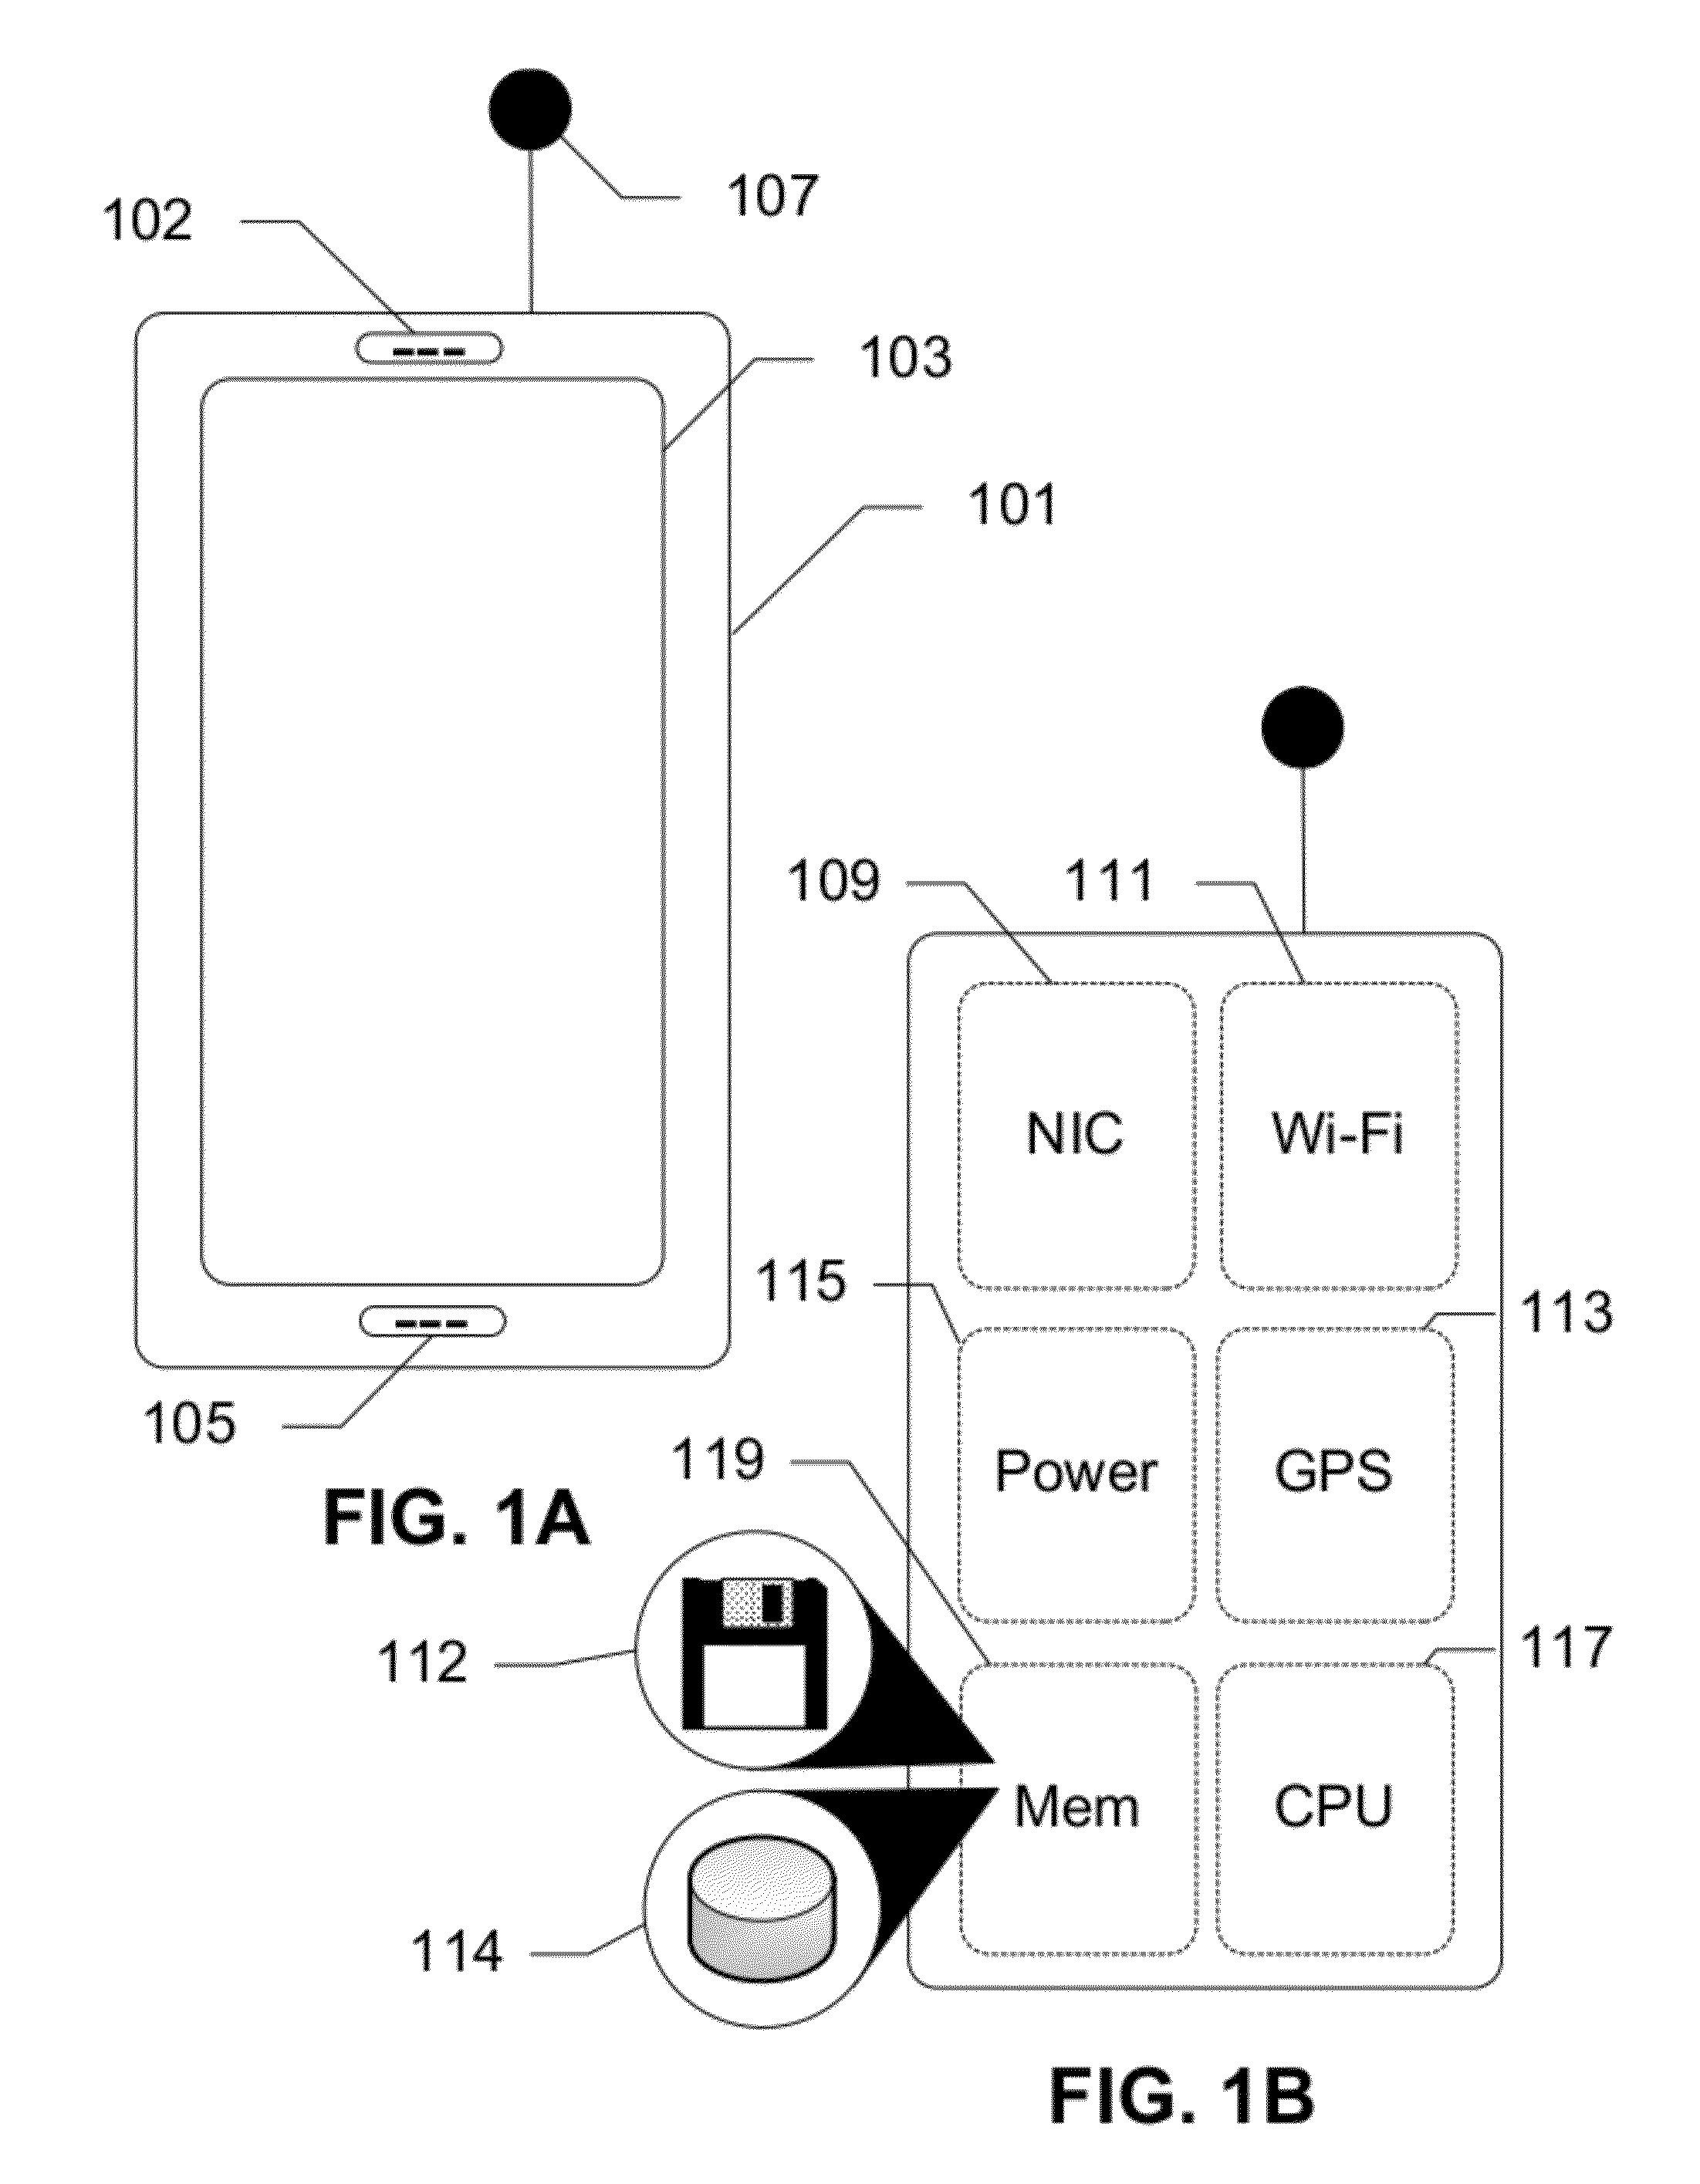 Location Estimation of a Mobile Device in a UMTS Network